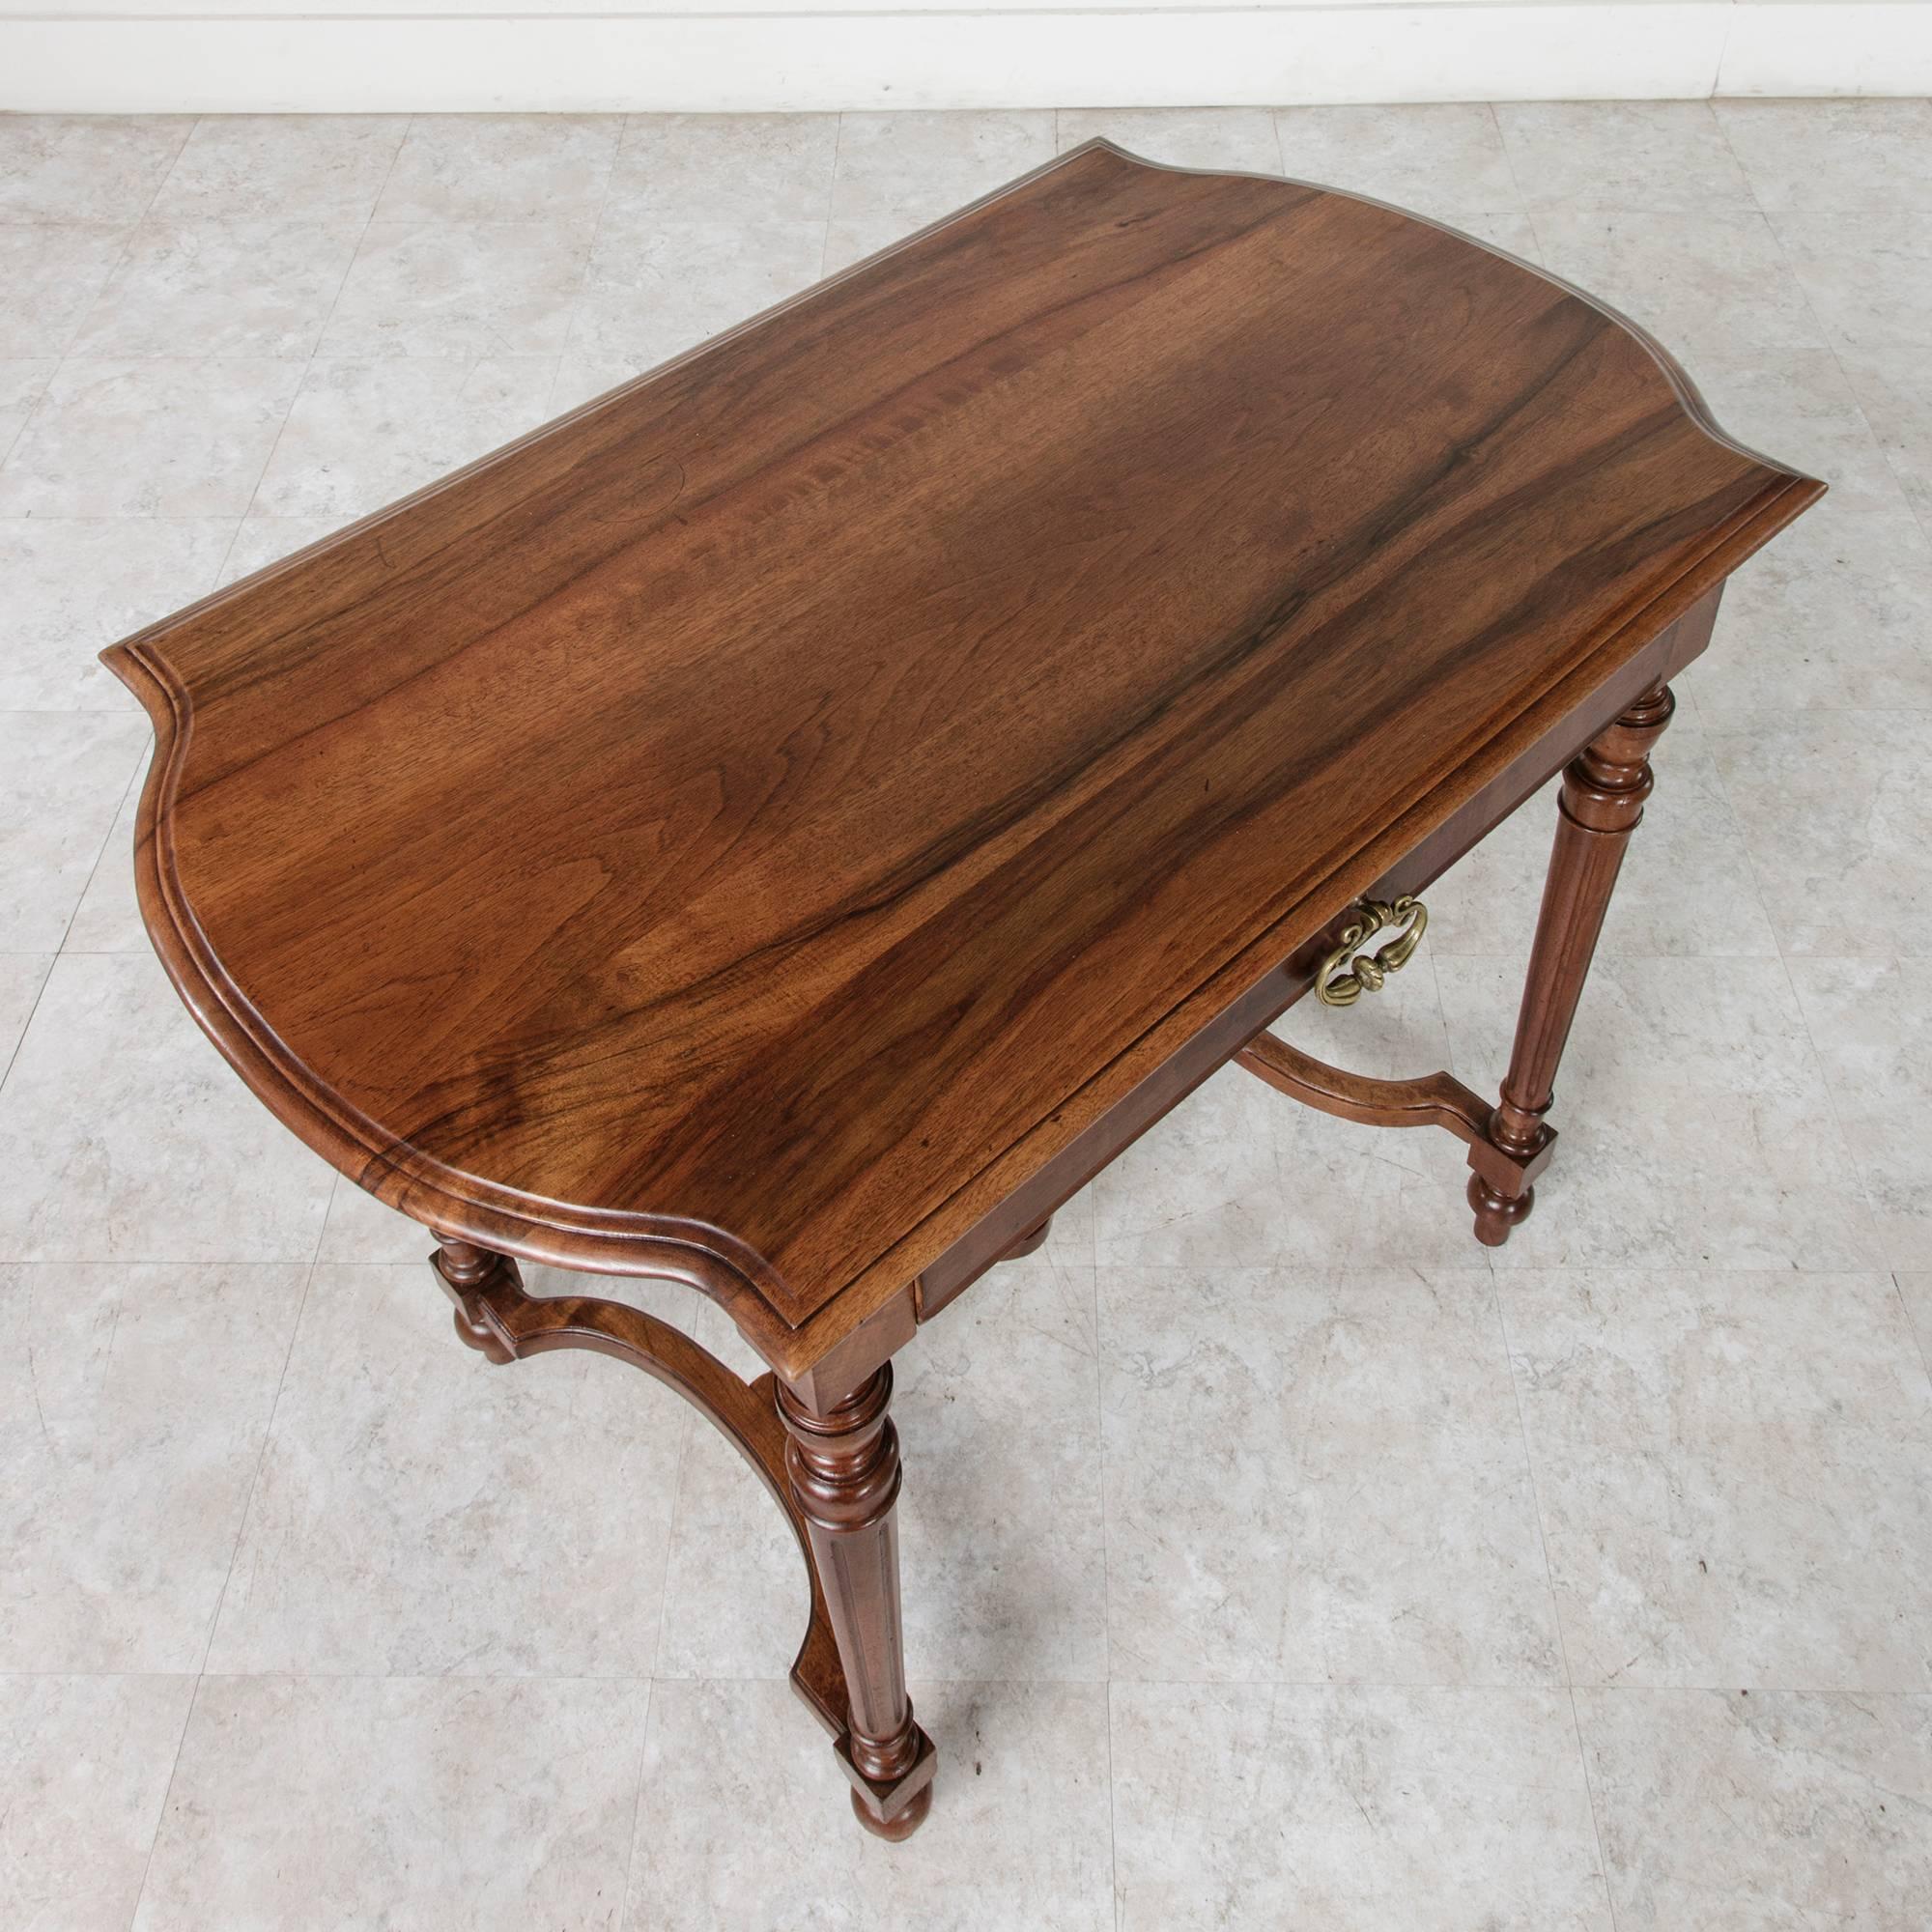 Bronze 19th Century, French Solid Walnut Louis XVI Style Desk Side Table or Console